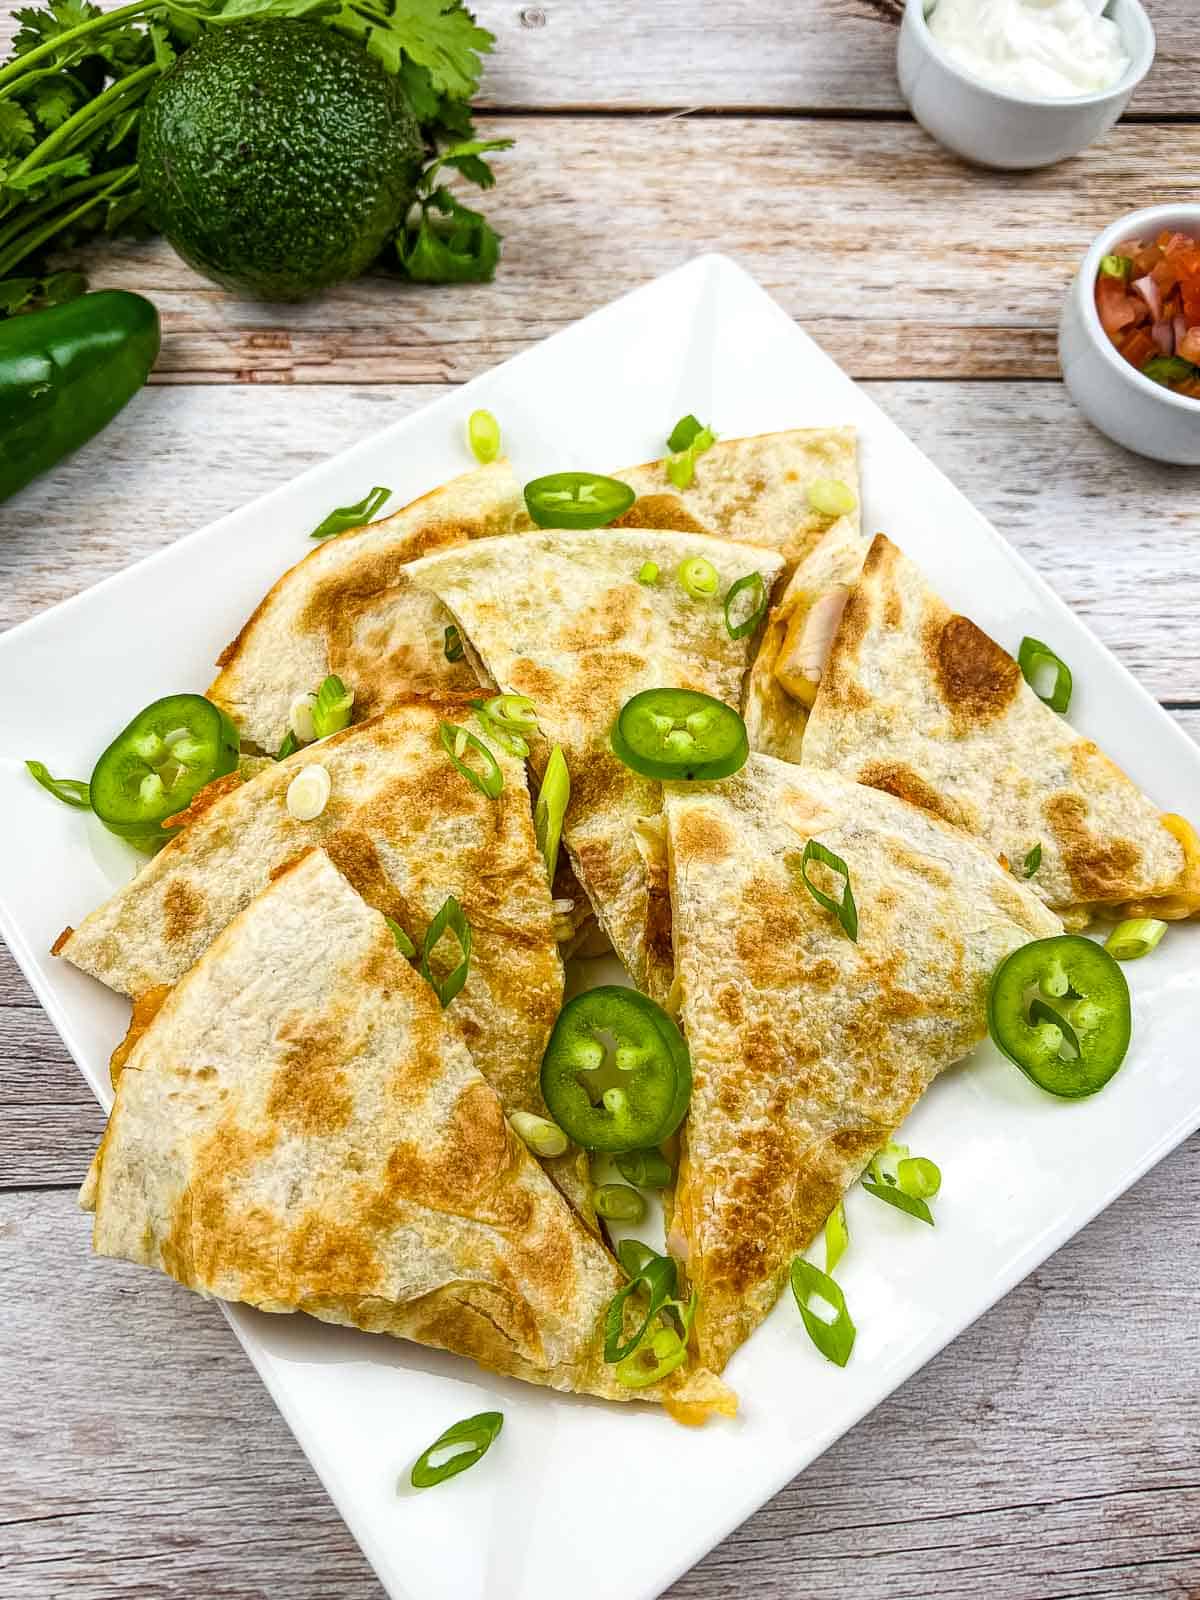 Smoked turkey quesadilla cut in wedges on a plate.